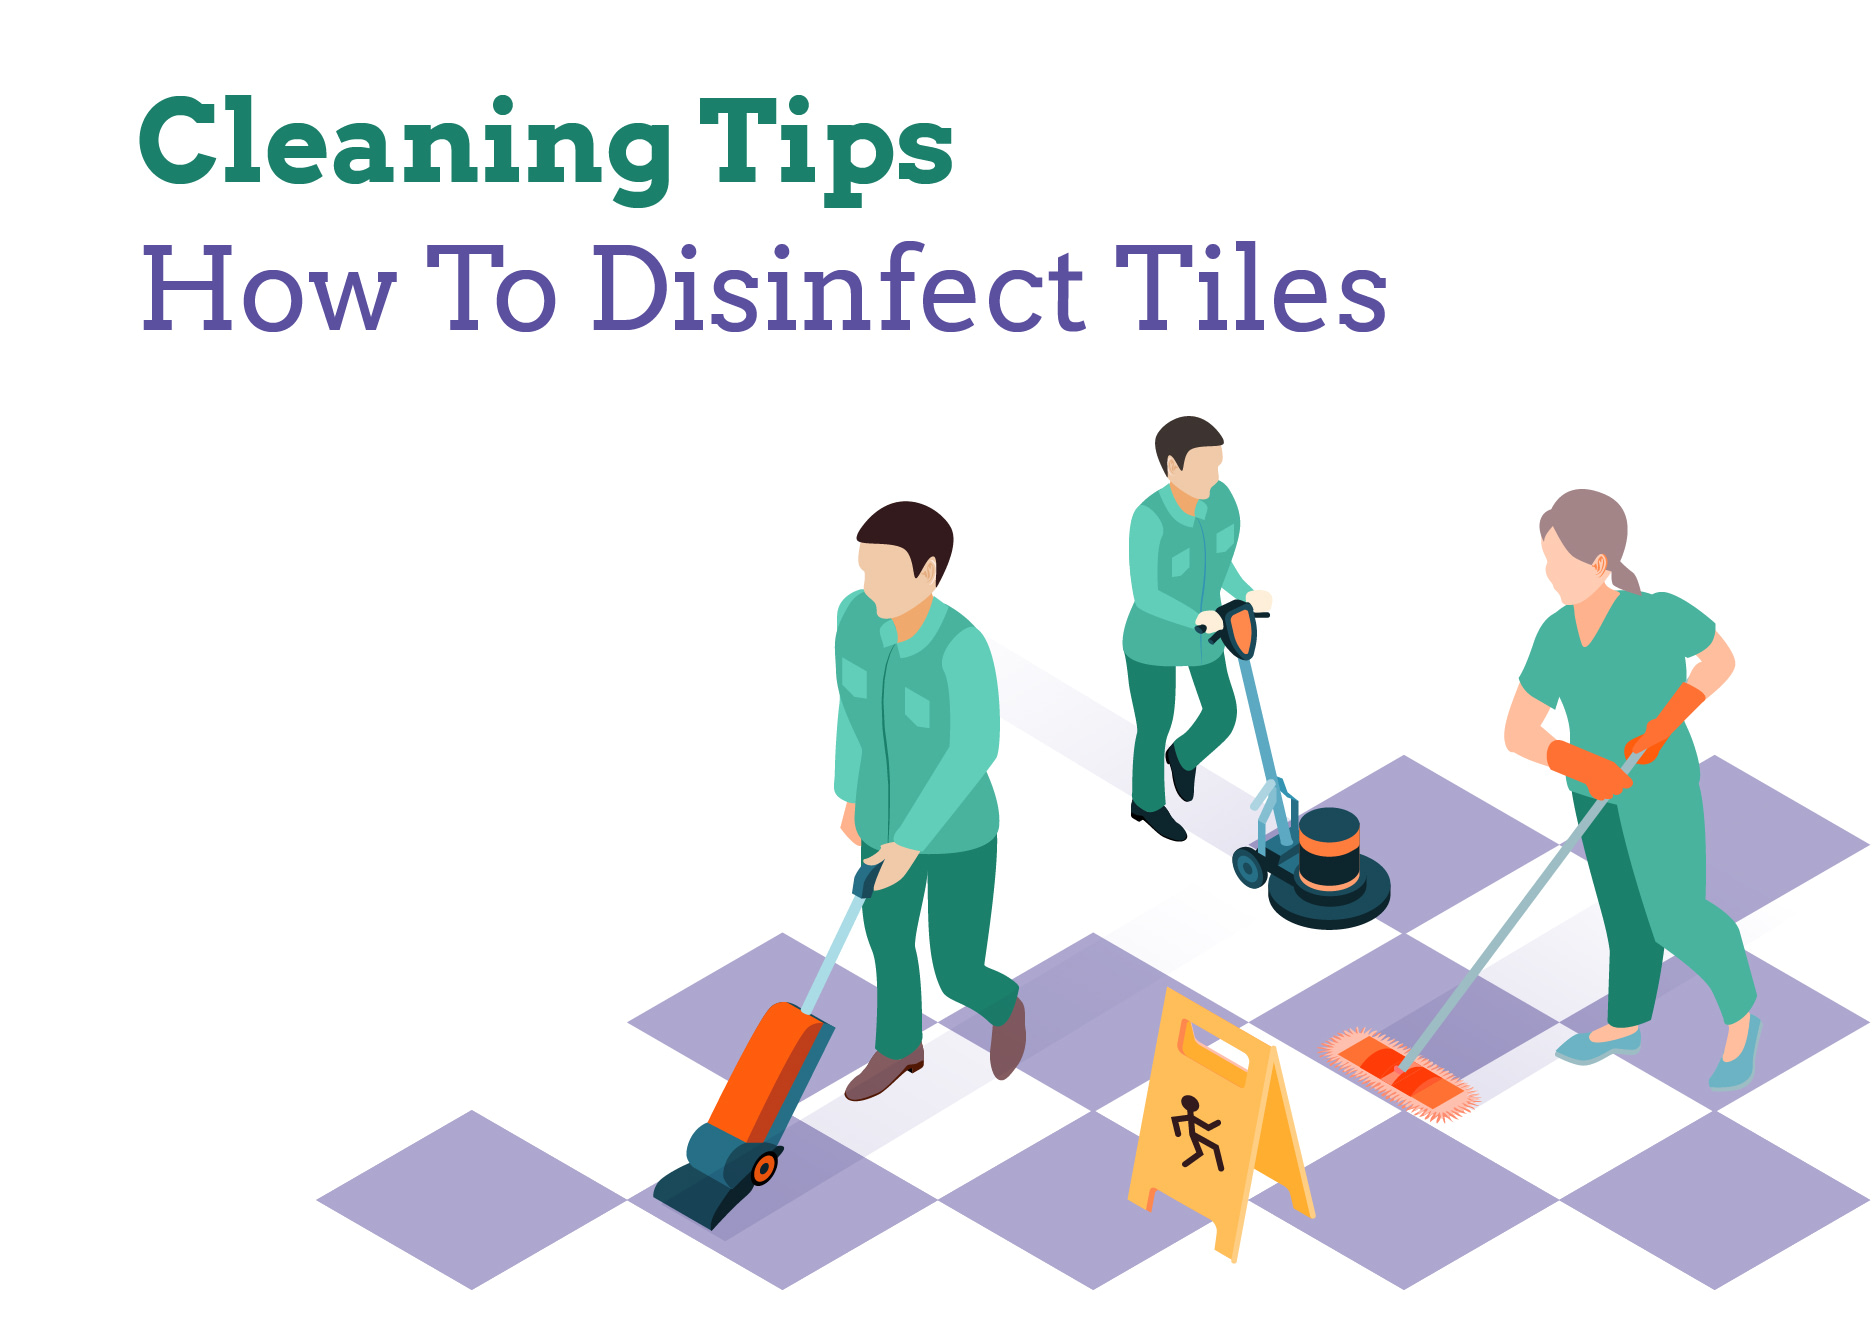 How to Disinfect Tiles from CoronaVirus